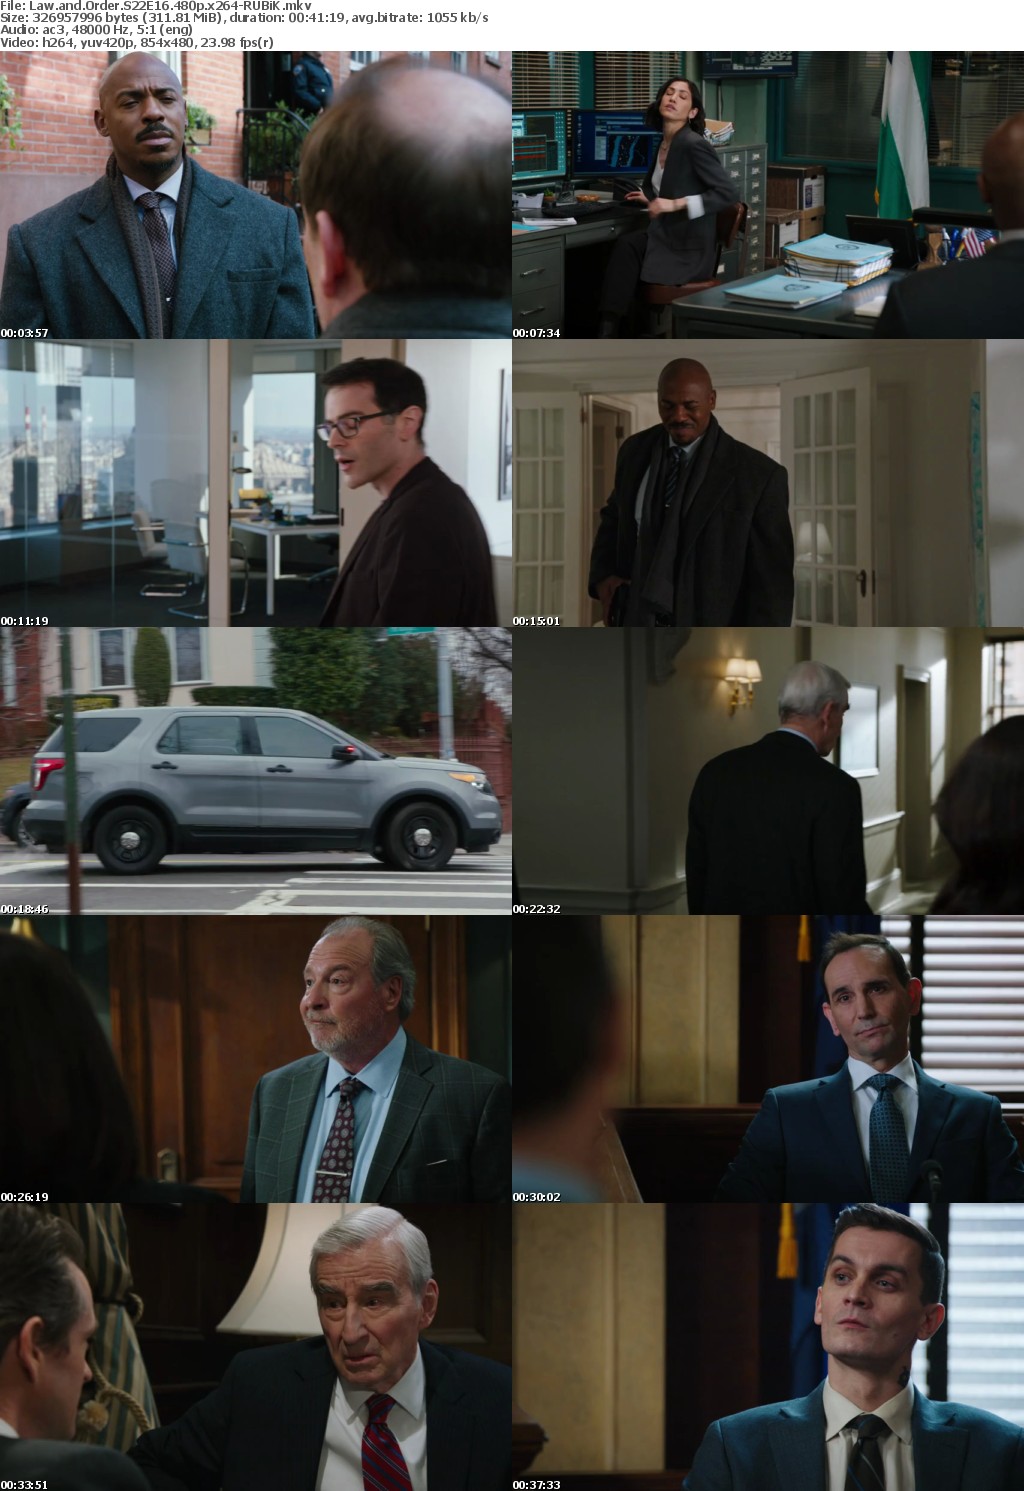 Law and Order S22E16 480p x264-RUBiK